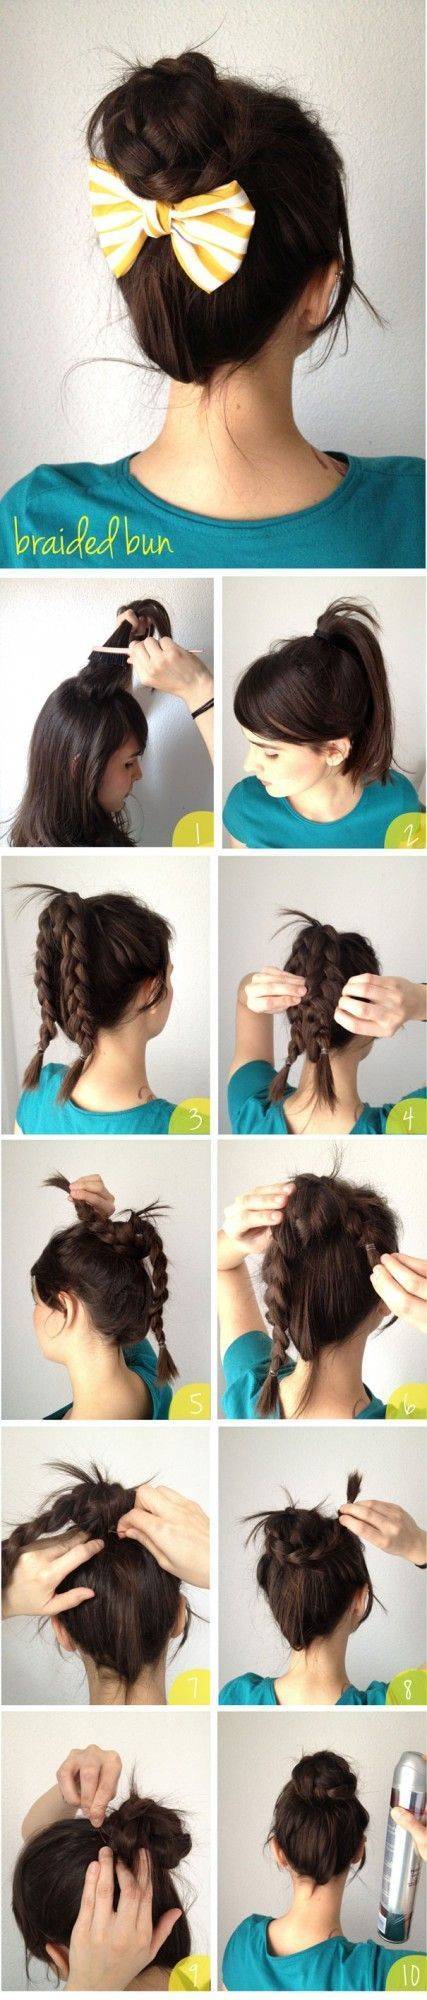 1446315823 quick hairstyle